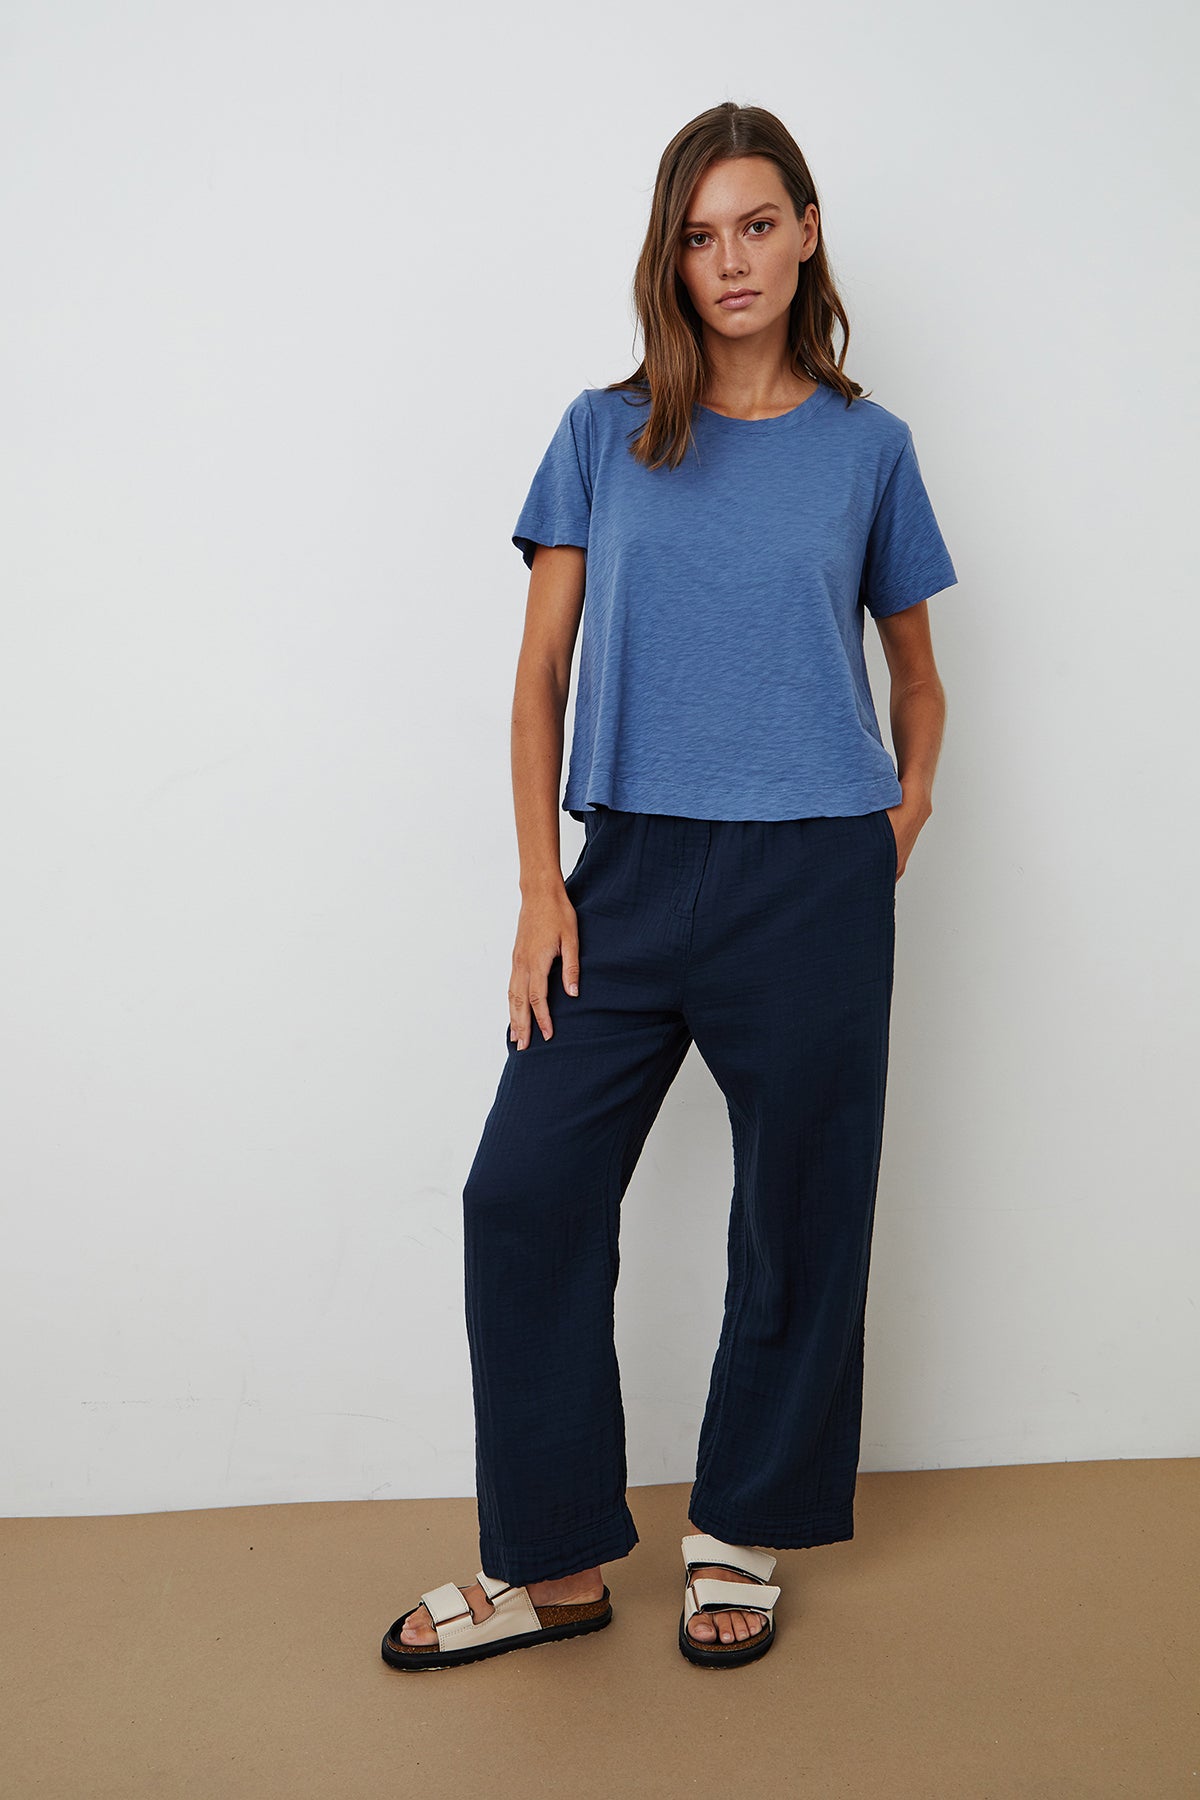 The model is wearing a blue LULA COTTON SLUB SWING TEE by Velvet by Graham & Spencer and wide leg pants.-20858217922753